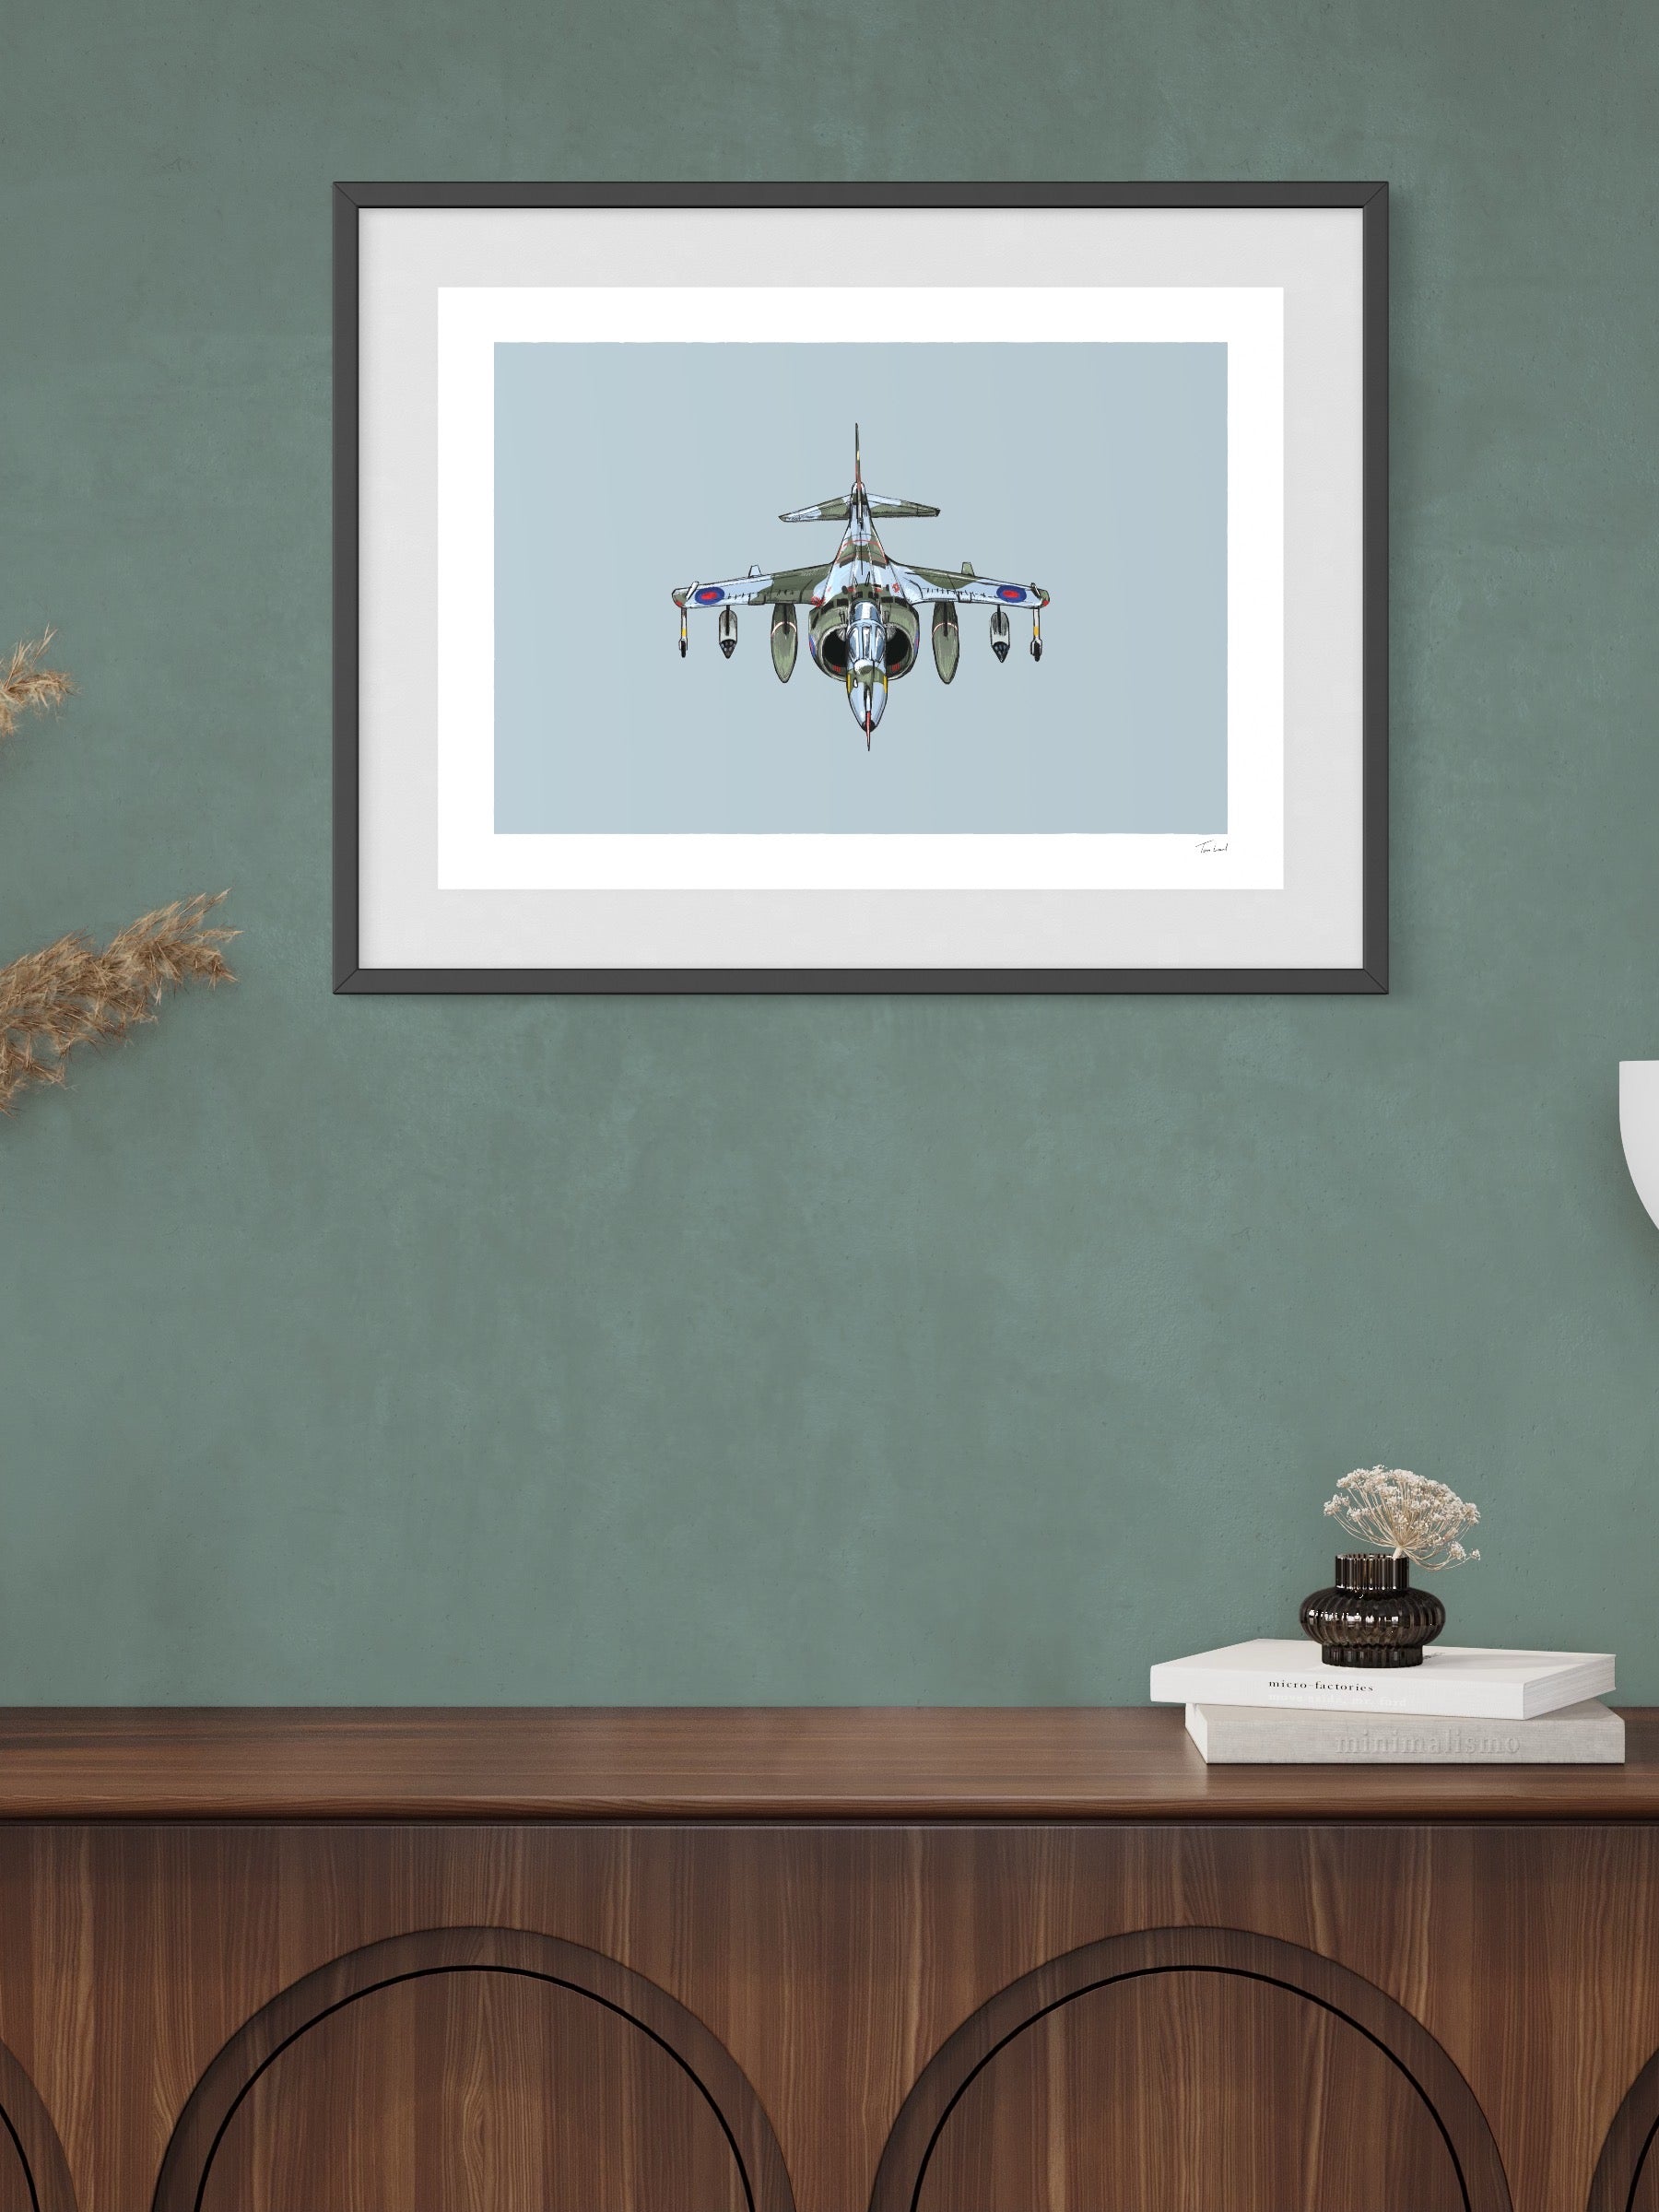 This image shows a giclee wall art print by Tom Laird Illustration of the British classic plane, the Harrier, framed in a beautiful living room with tasteful modern home decor. This art print is available from Tom Laird Illustration in a variety of sizes.